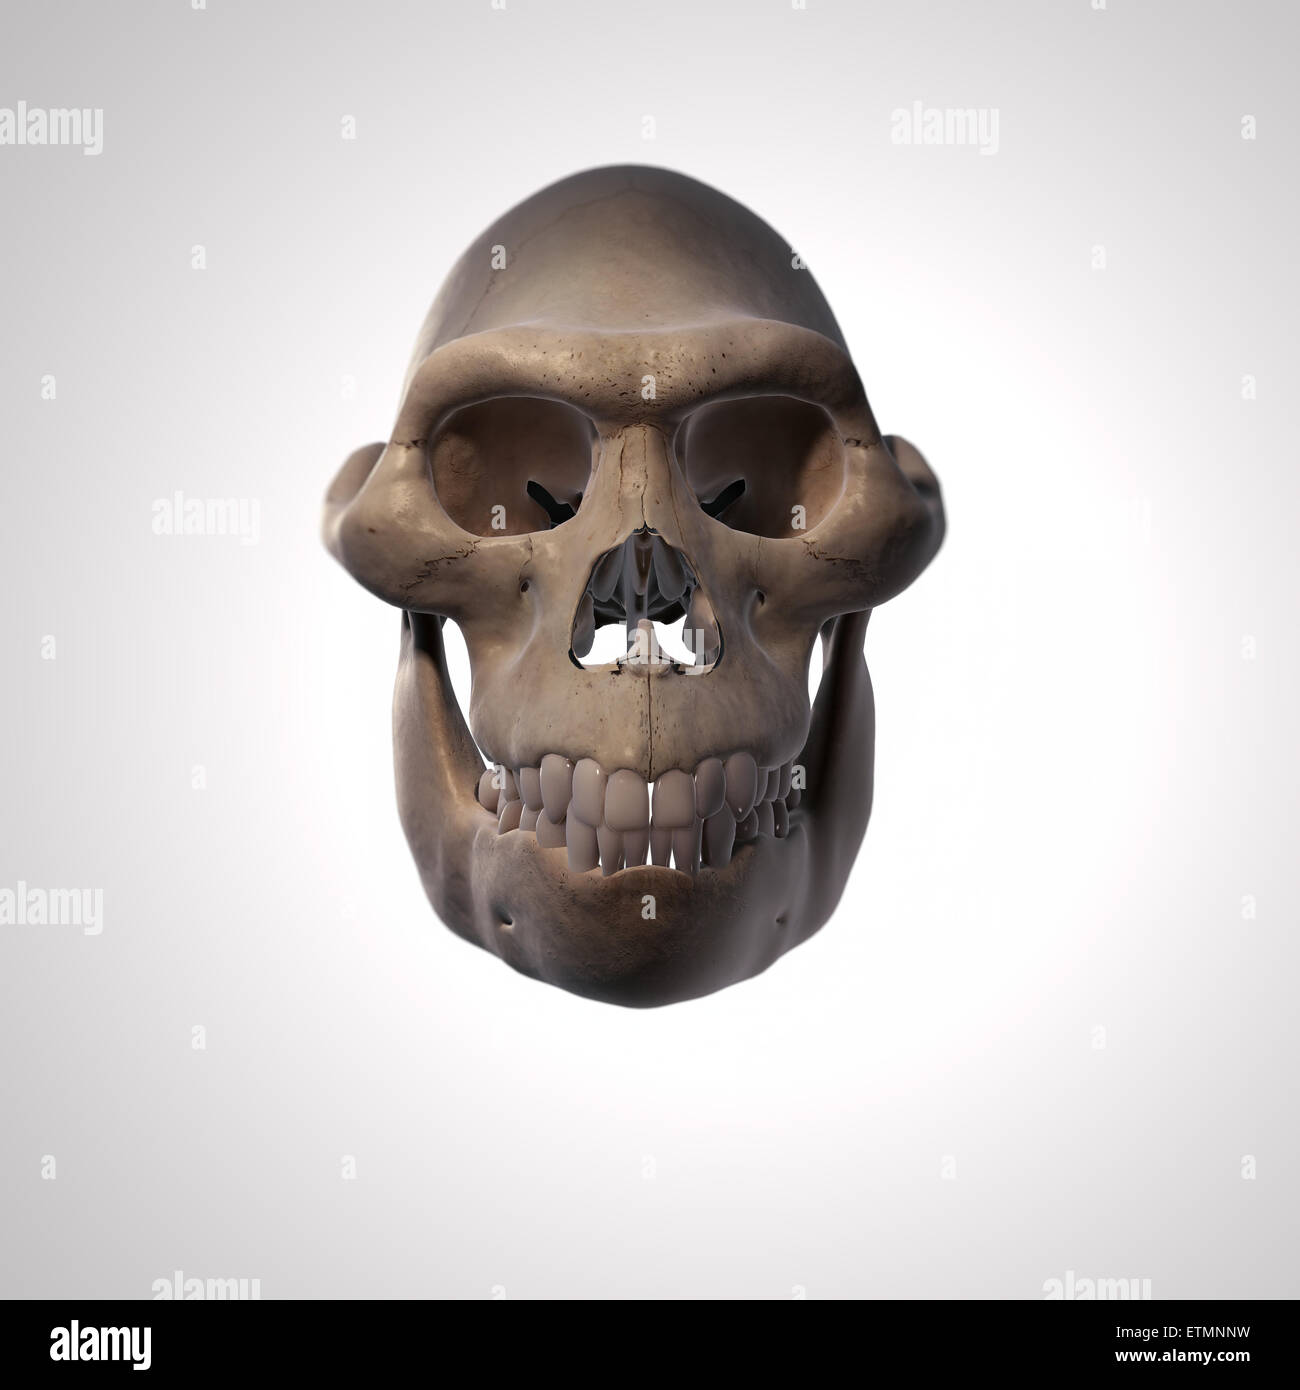 Illustration of an Australopithecus skull.  Australopithecus is an extinct genus of hominids and early ancestor to Homo Sapiens. Stock Photo